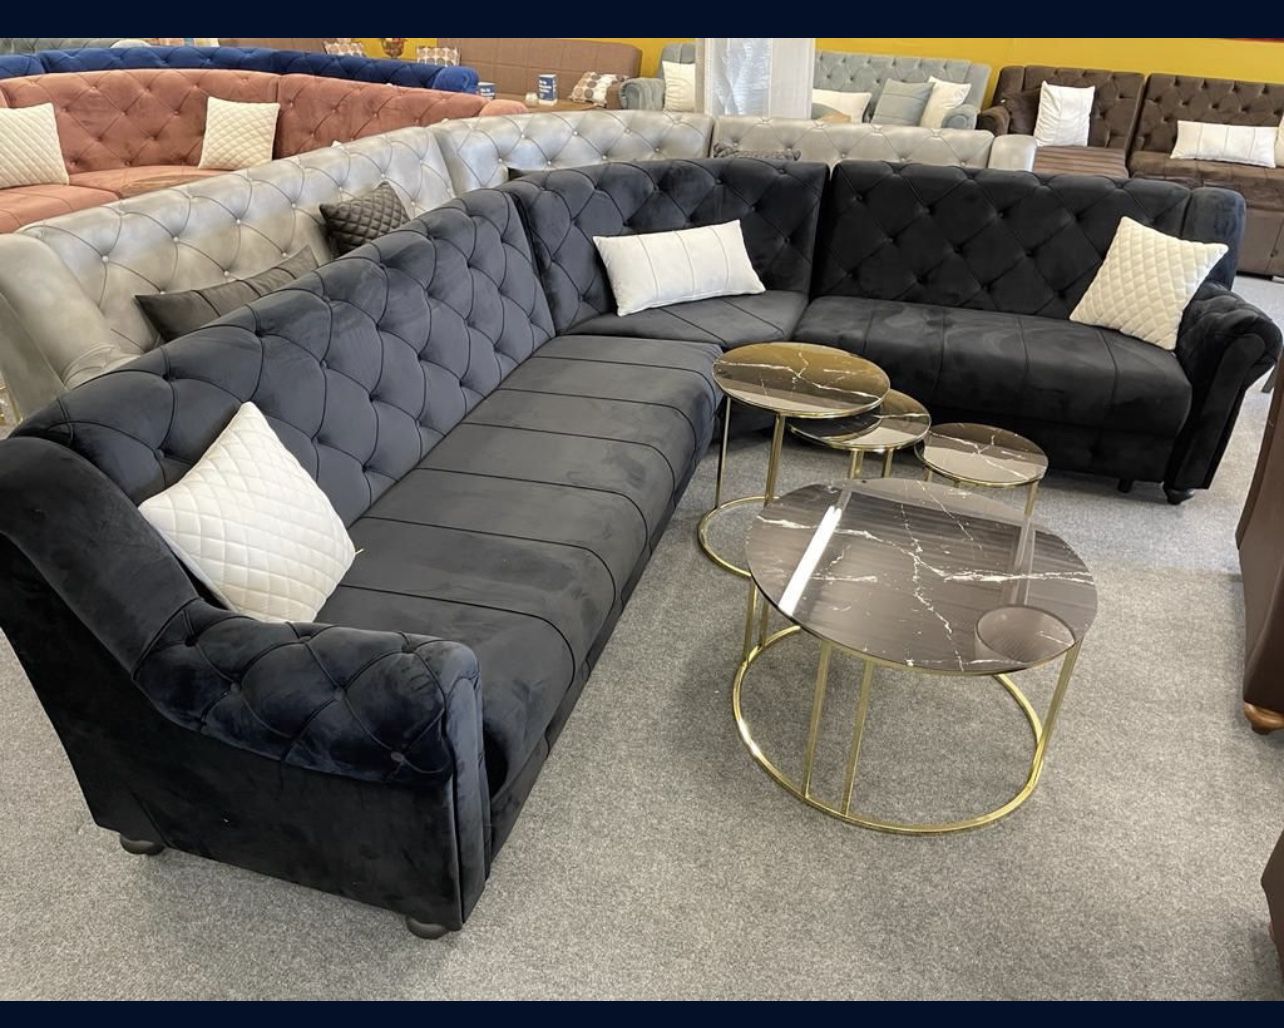 New Black Velvet Living Room Sectional Sleeper - Delivery And Financing Available 